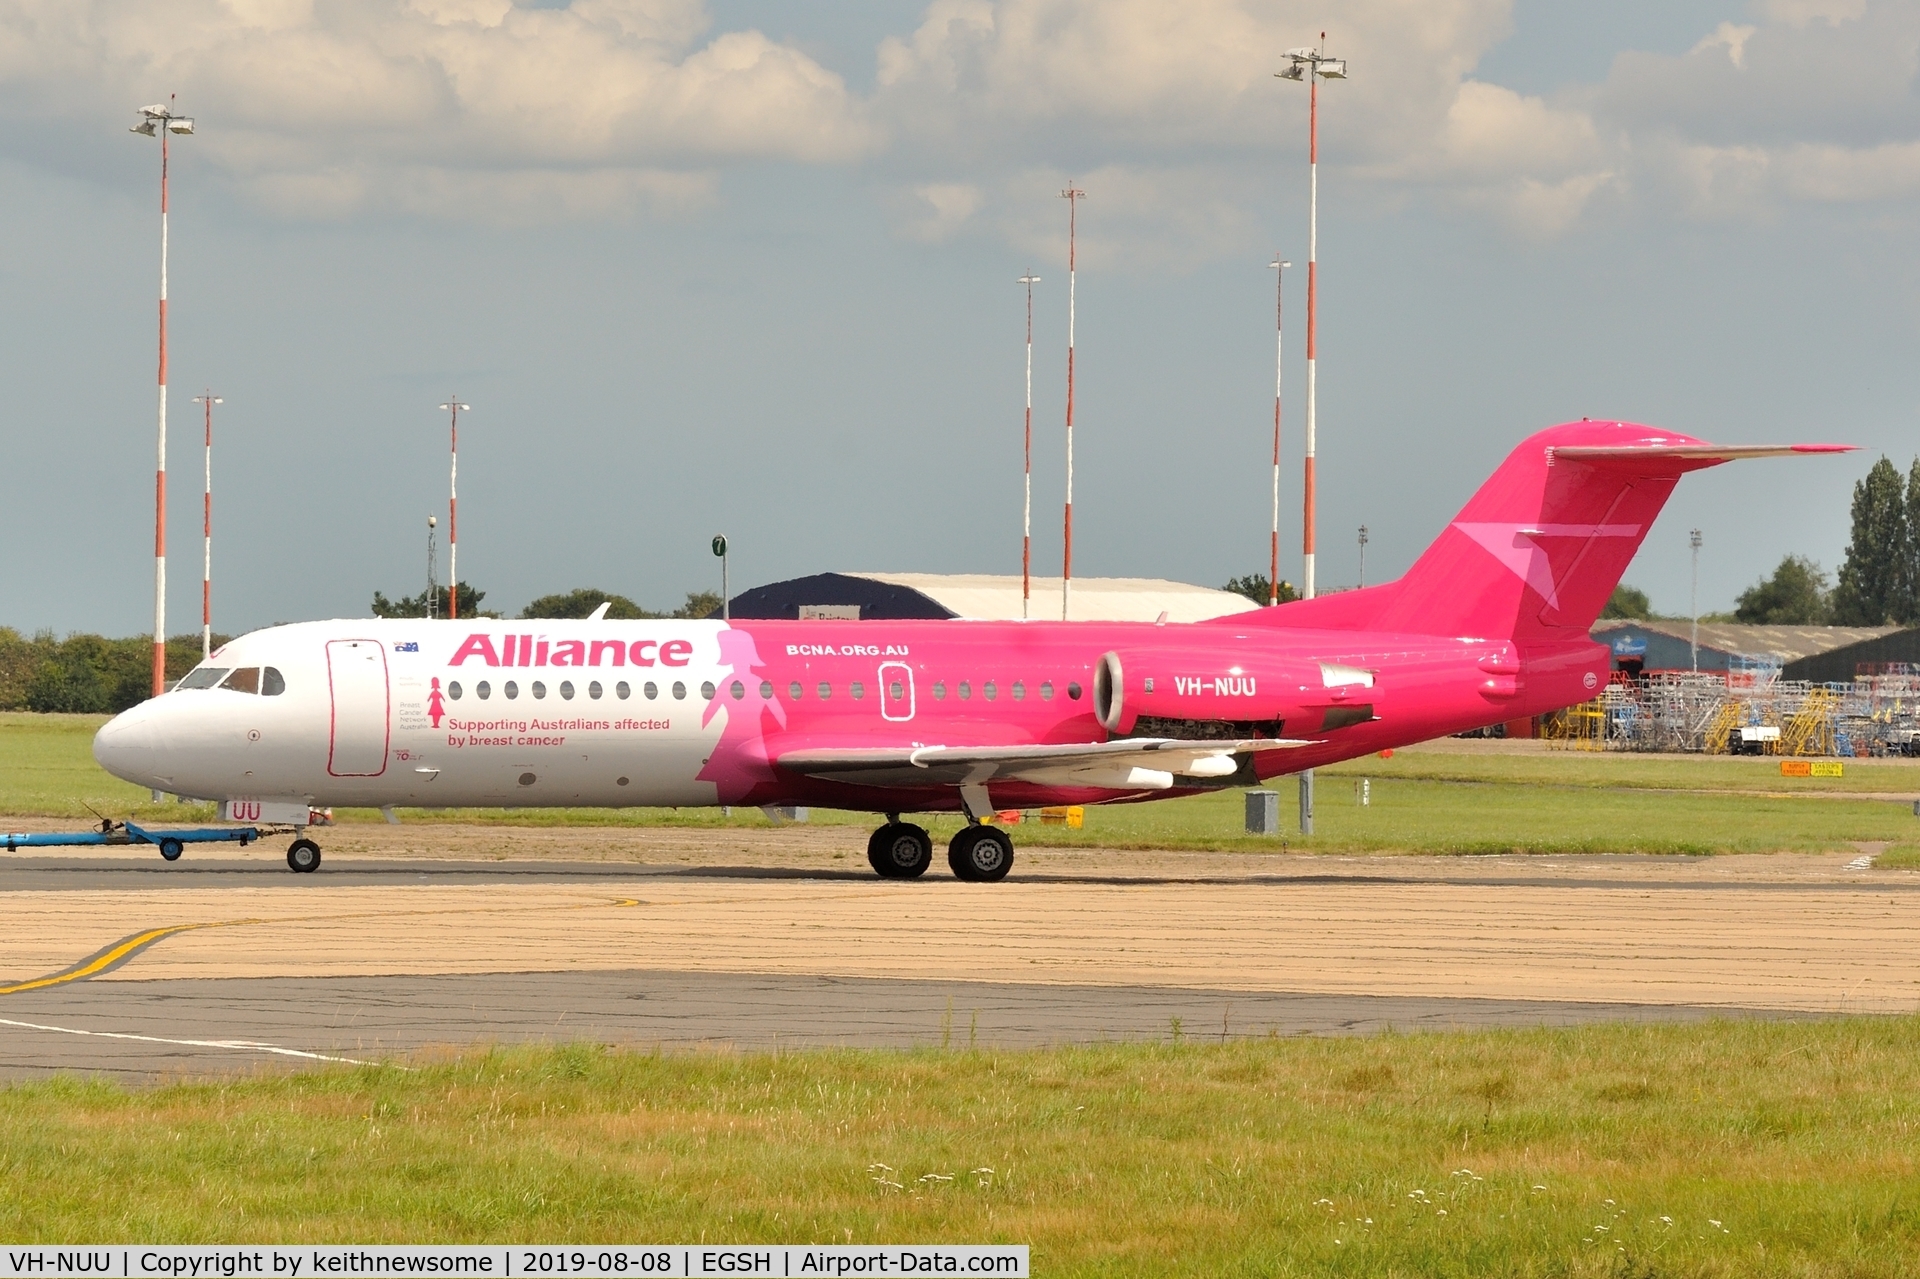 VH-NUU, 1995 Fokker 70 (F-28-0070) C/N 11532, Alliance Airlines 'Supporting Australians affected by breast cancer'